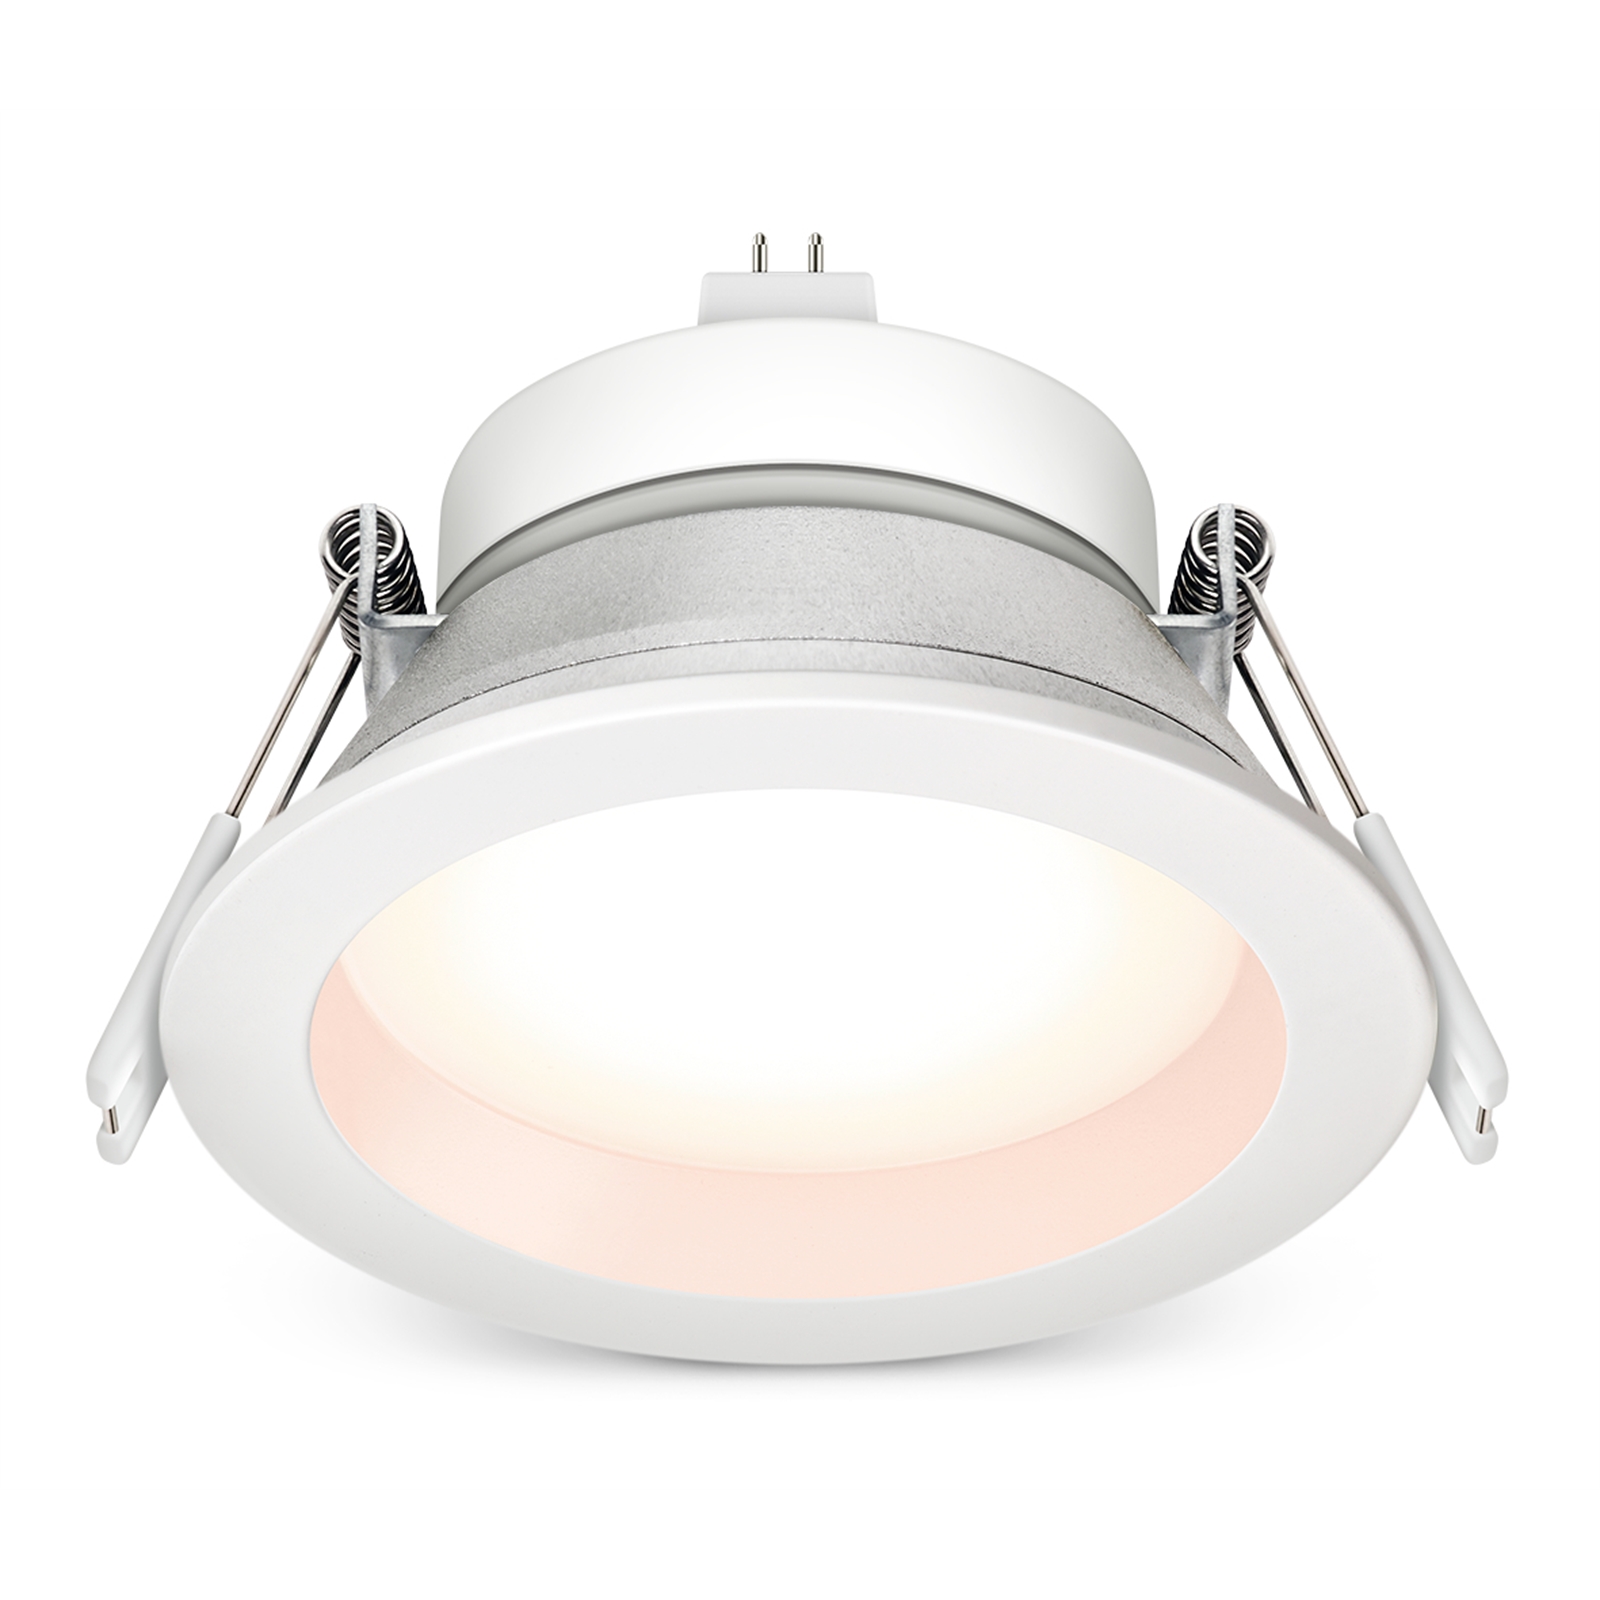 HPM 12V 7W 770lm Cool White Fixed LED Downlight